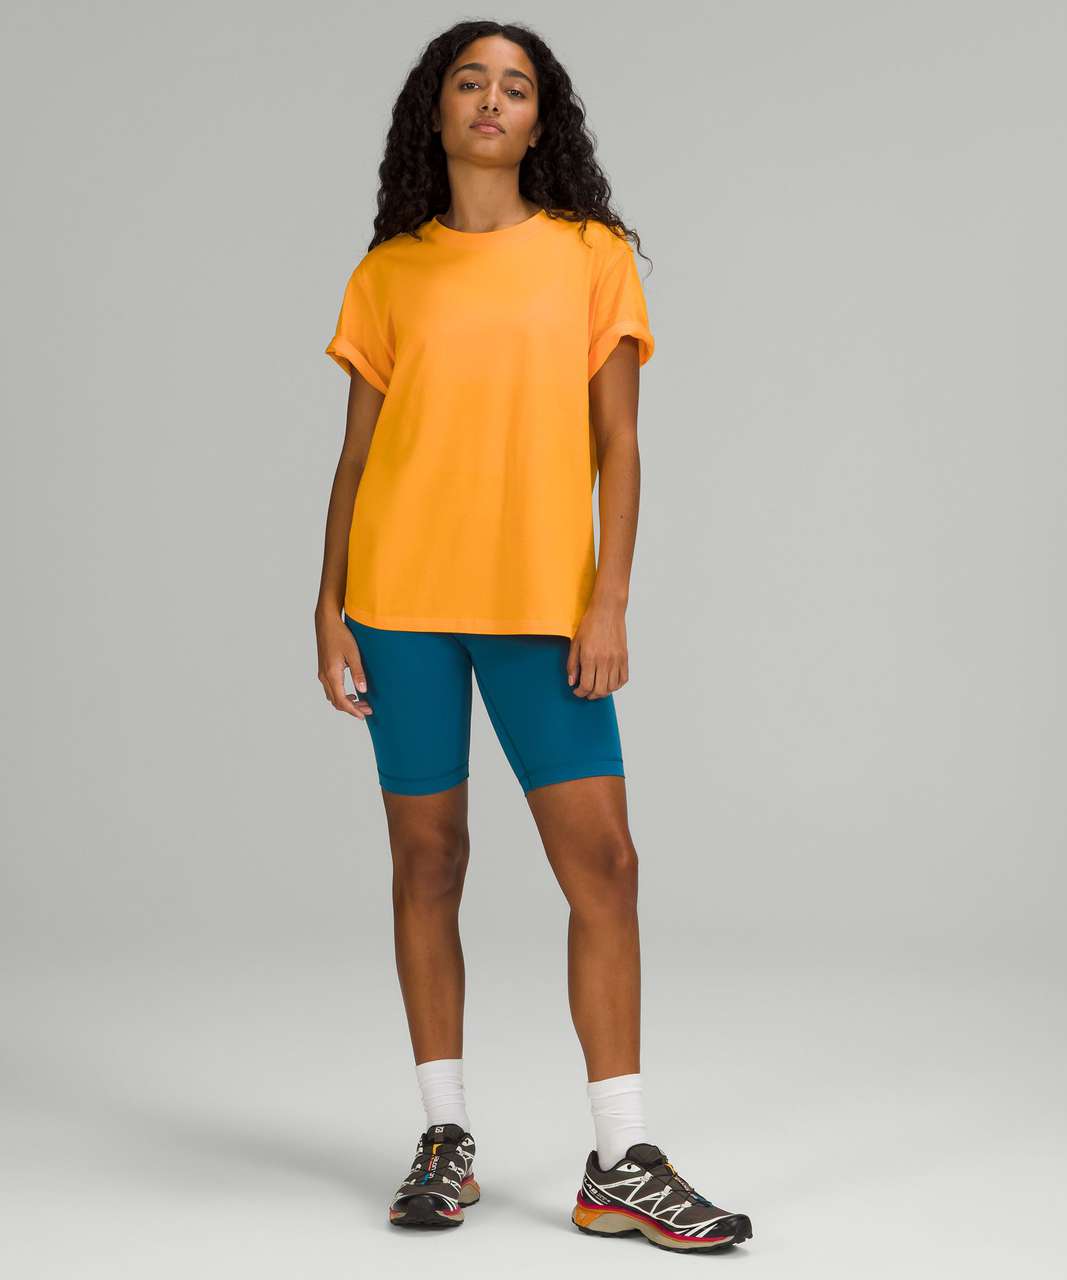 Lululemon All Yours Short Sleeve T-Shirt - Clementine